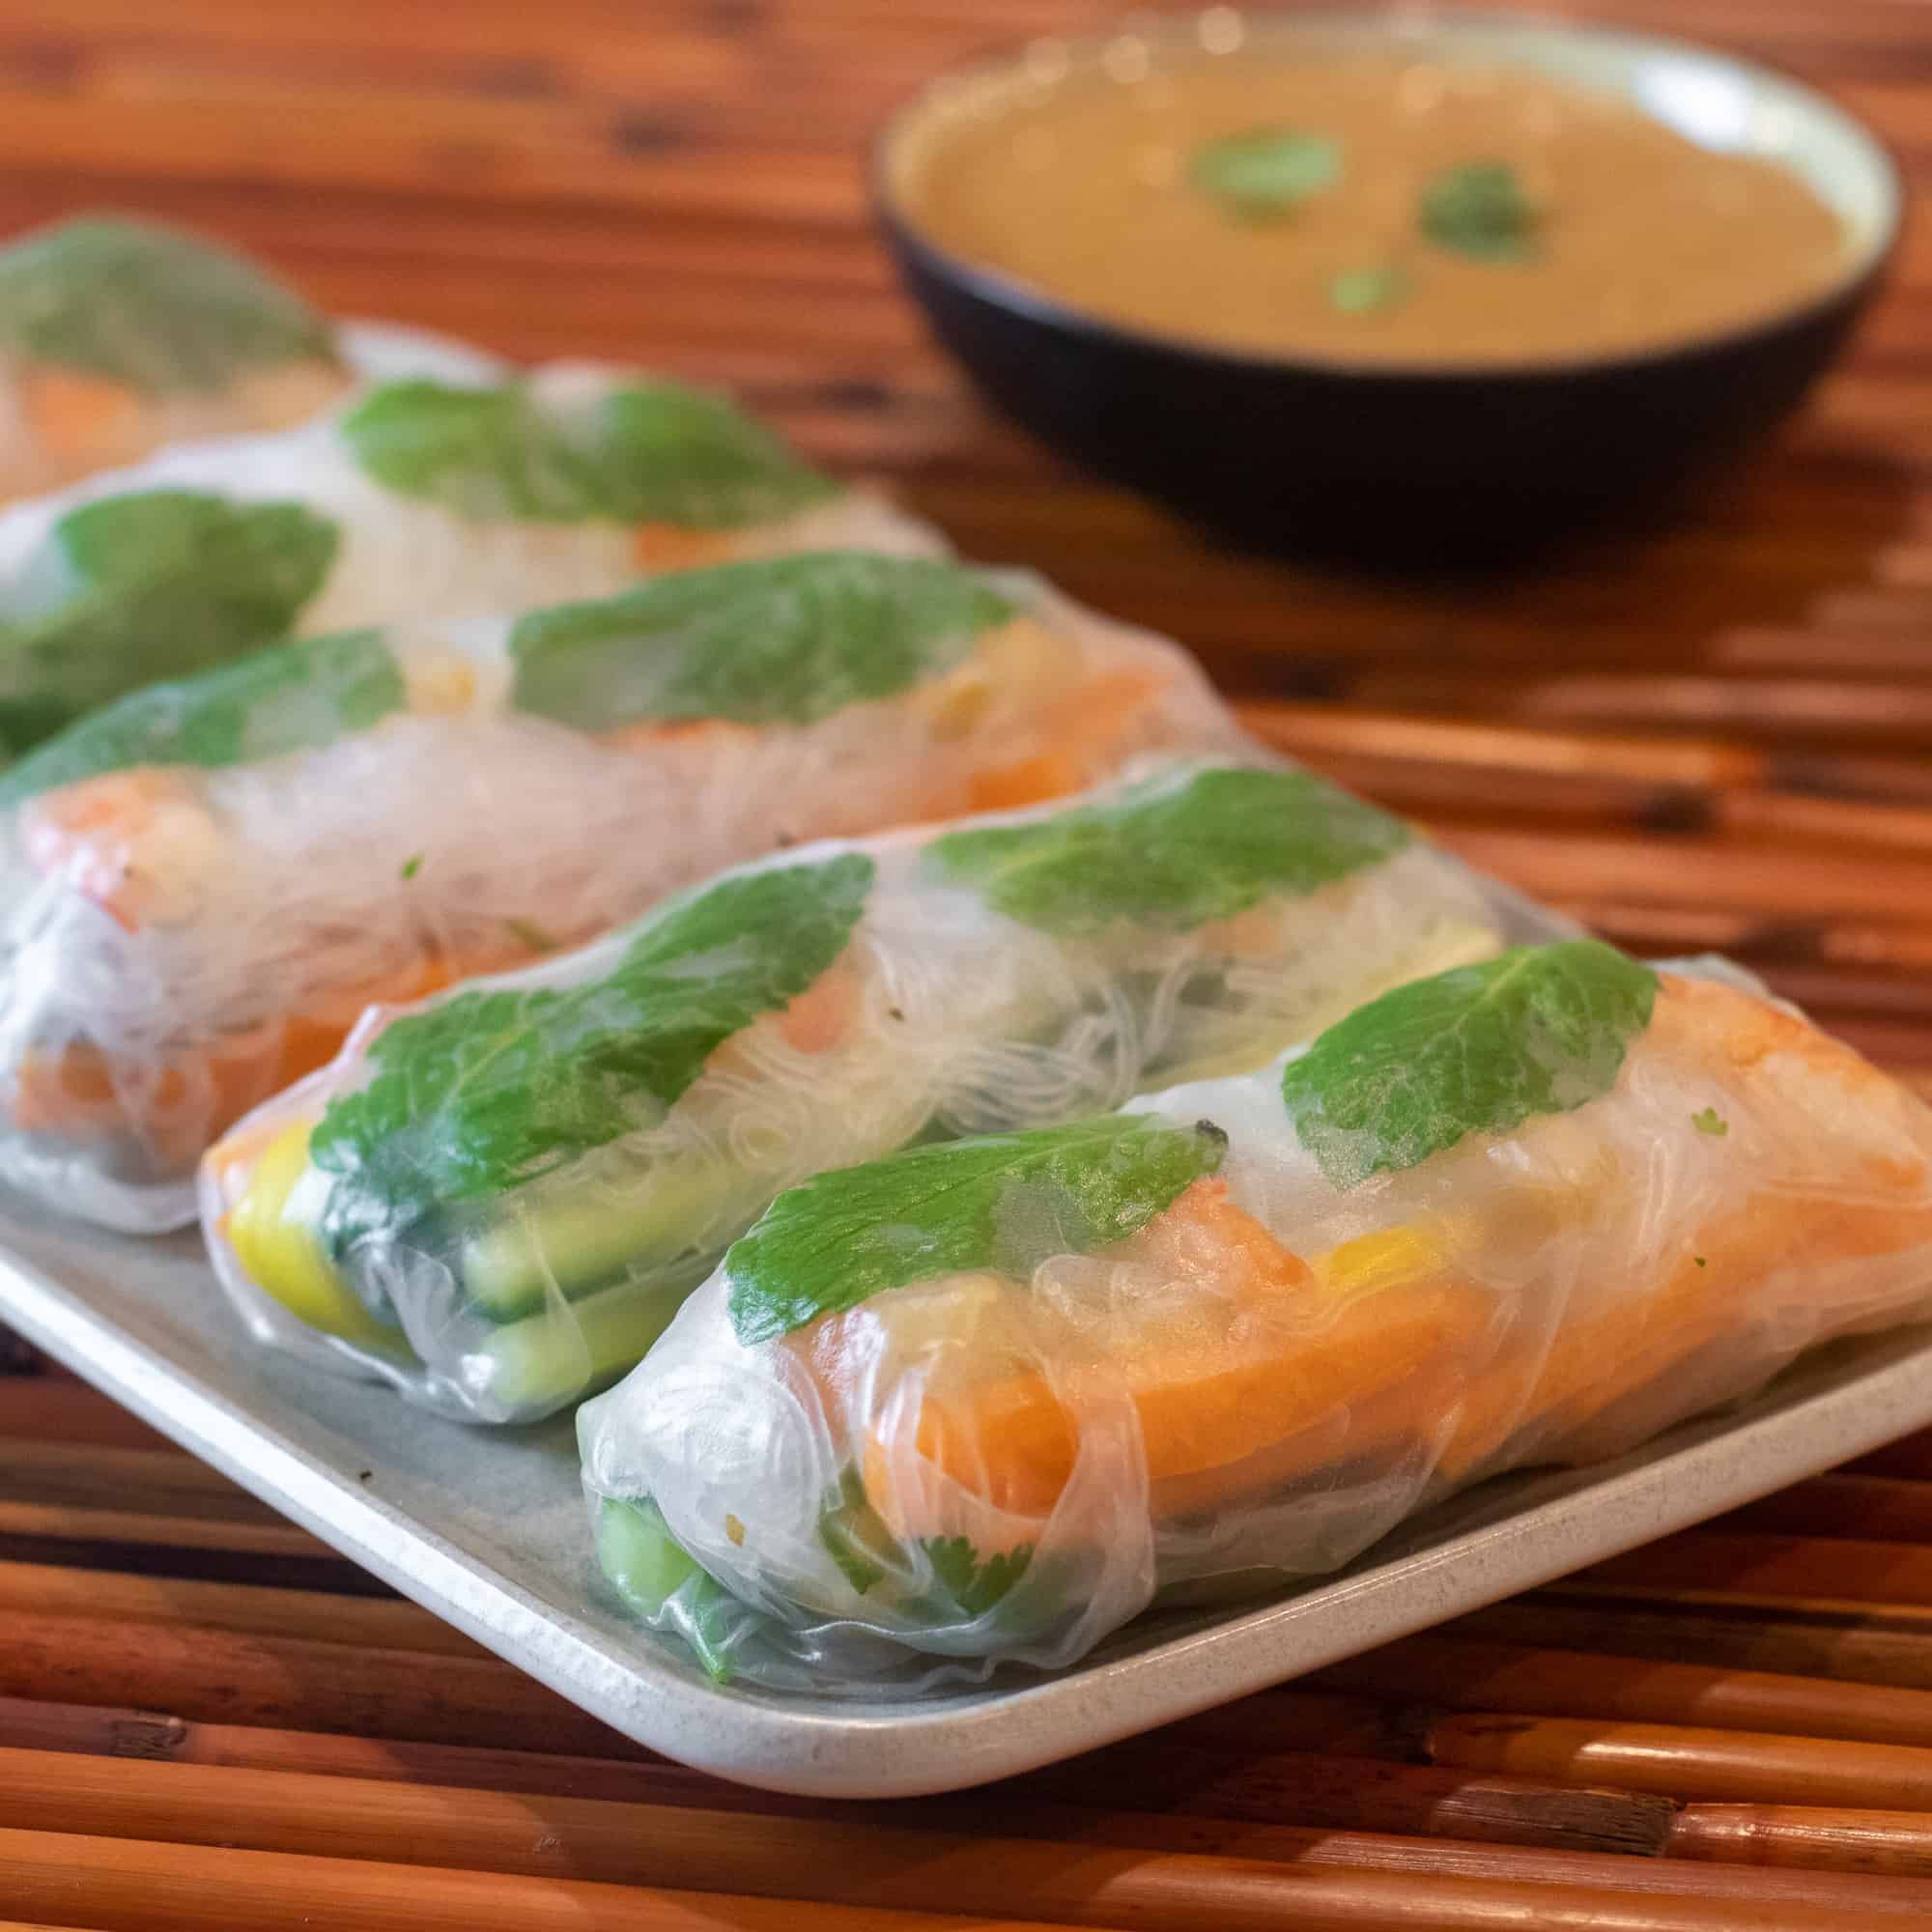 Serve the cold spring rolls with peanut sauce.